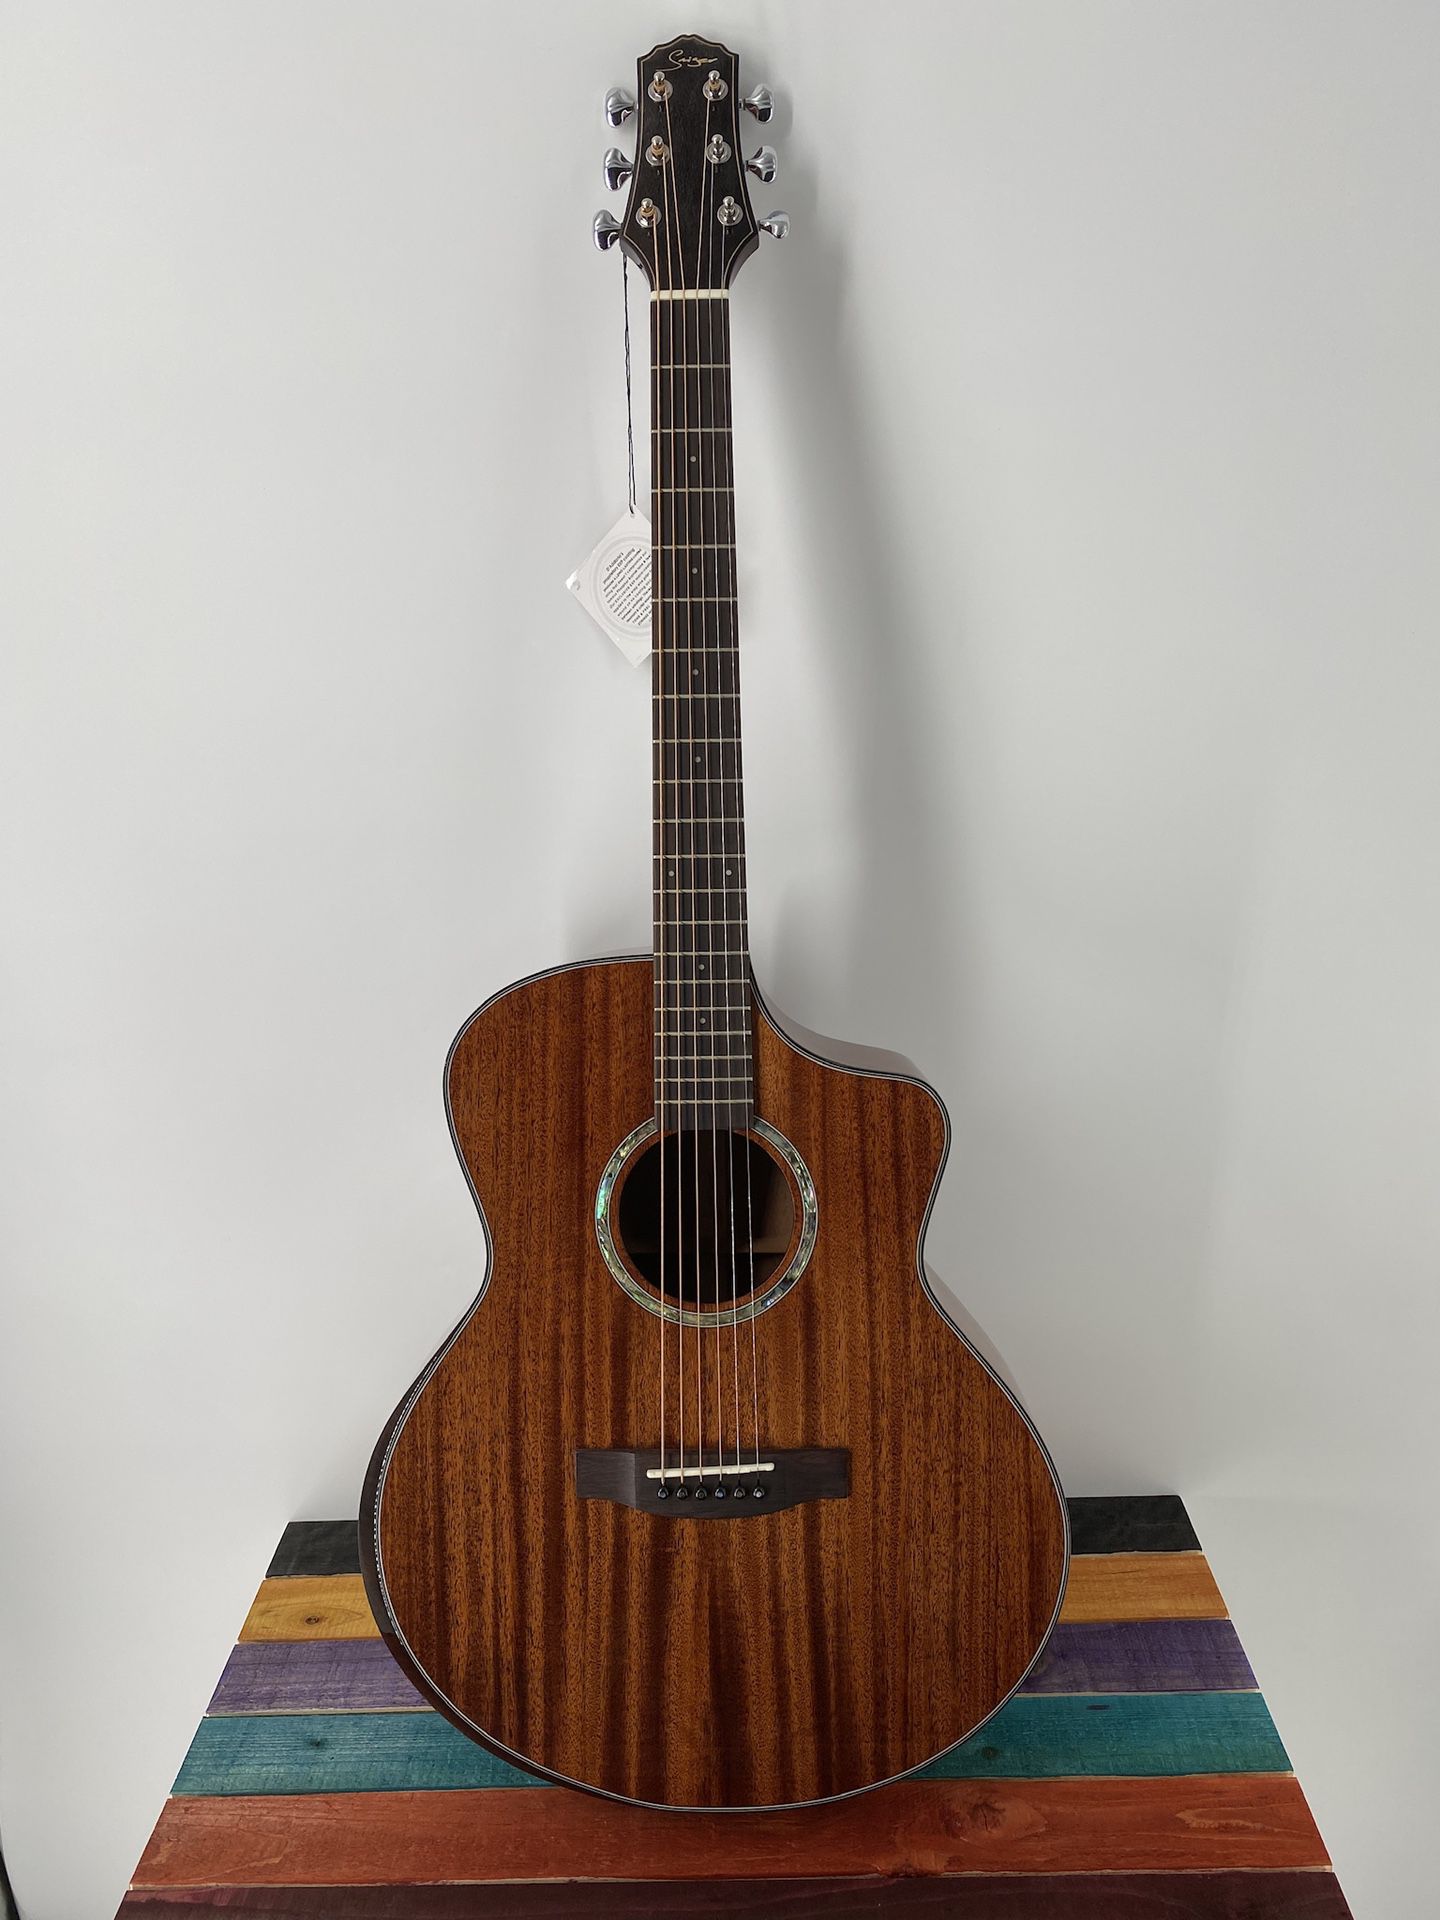 Acoustic Guitar Smiger M-F1SS Acoustic Guitar Cutaway Solid Woods High Quality Killer Price Free Deluxe Gigbag